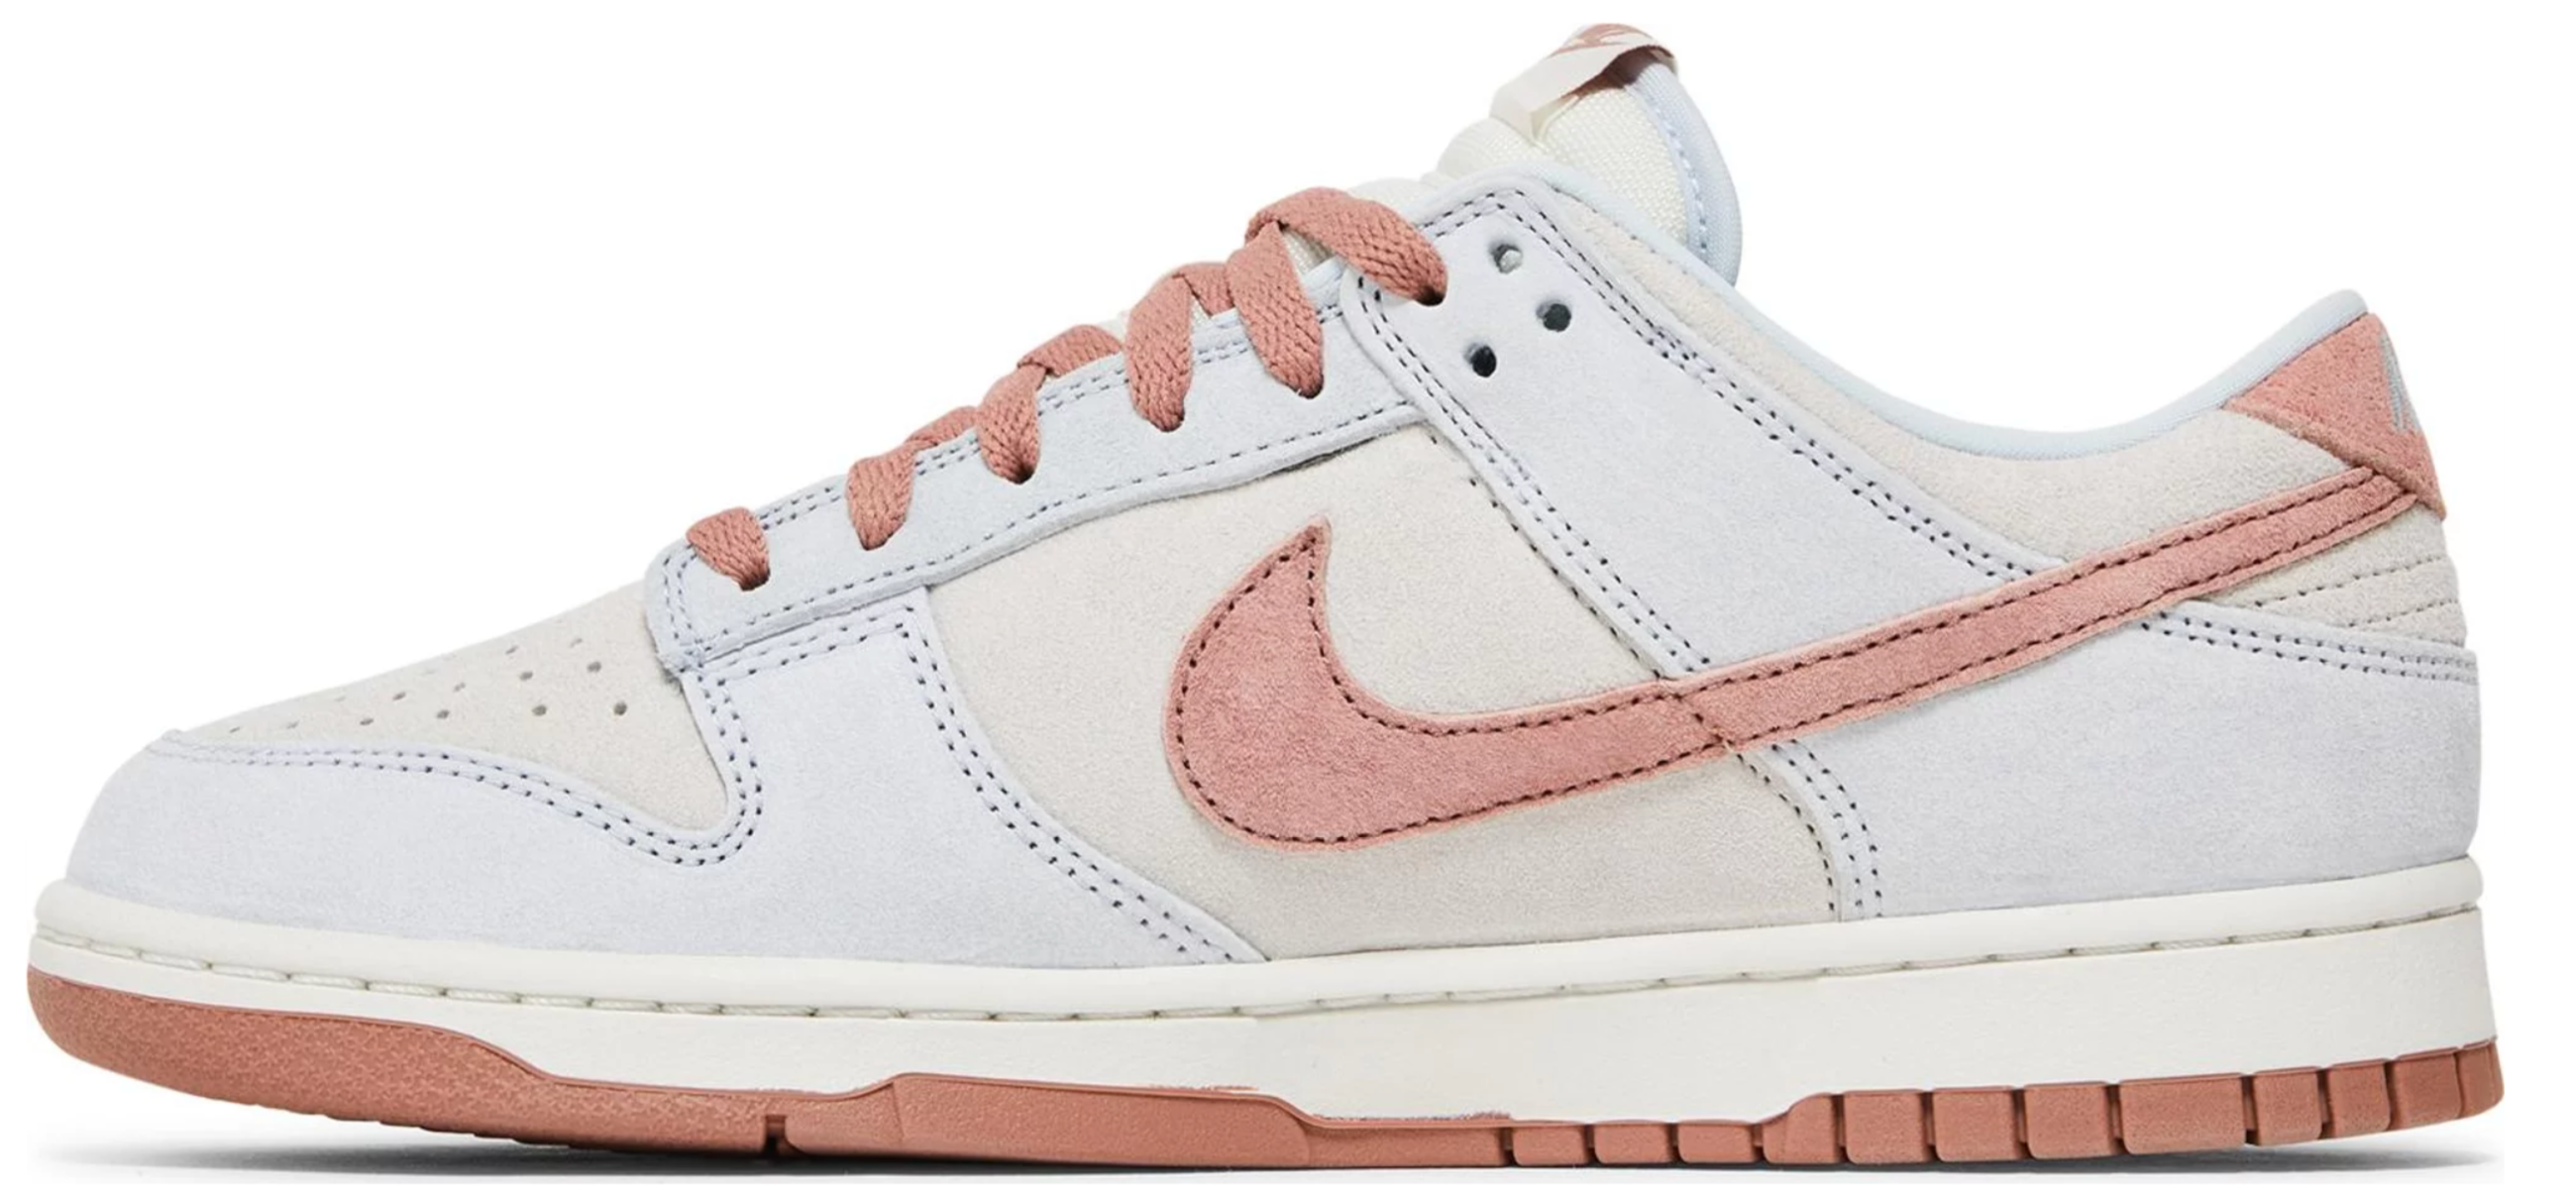 NIKE DUNK LOW FOSSIL ROSE